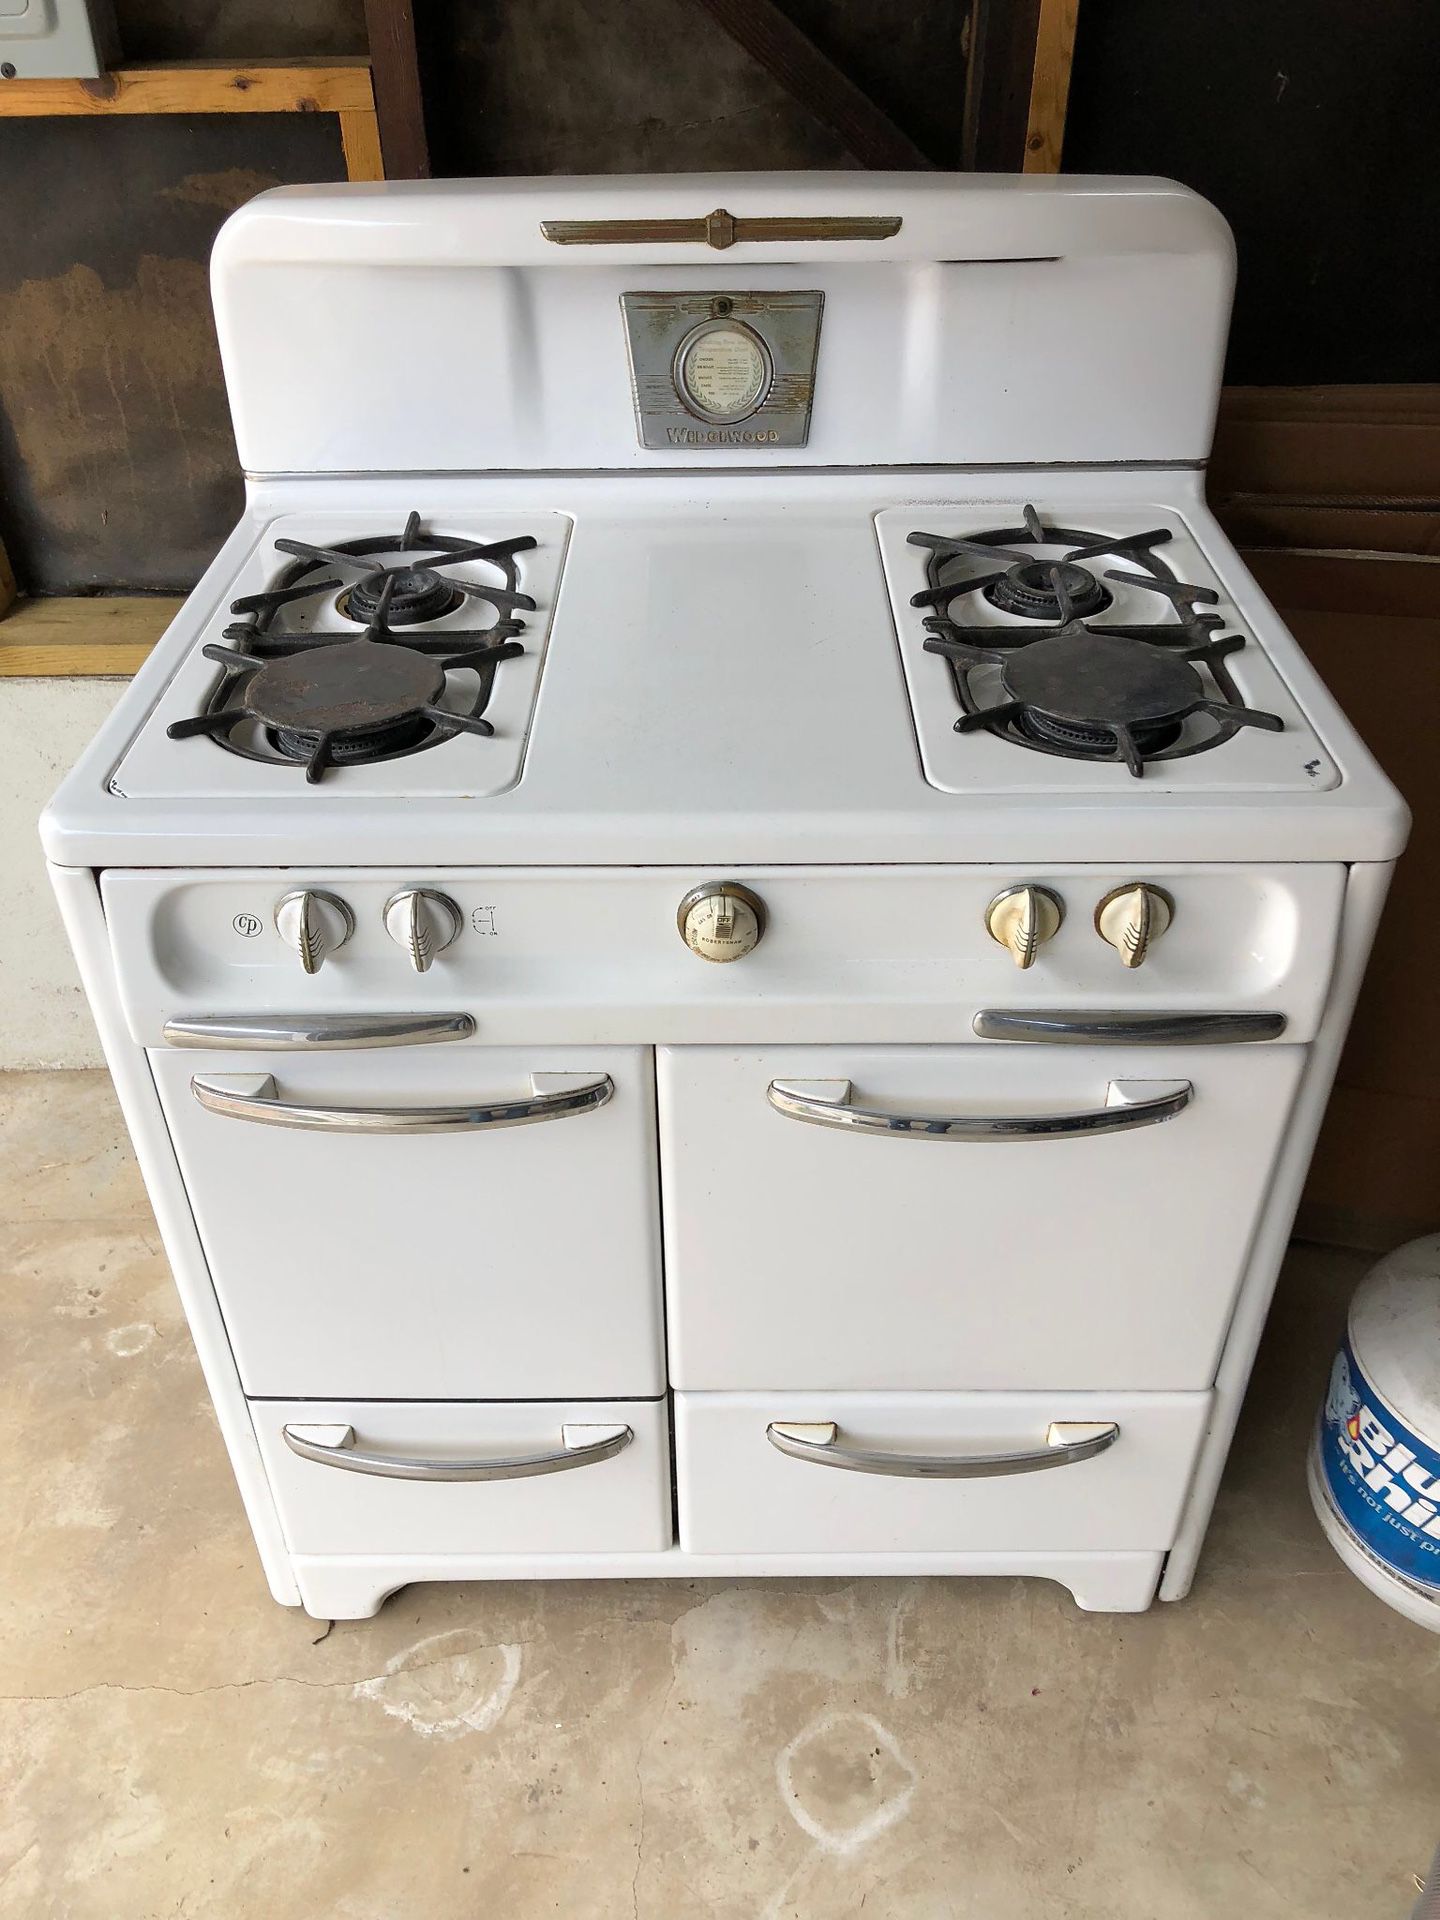 Beautiful Antique Vintage Wedgewood Range Gas Stove - Working Condition